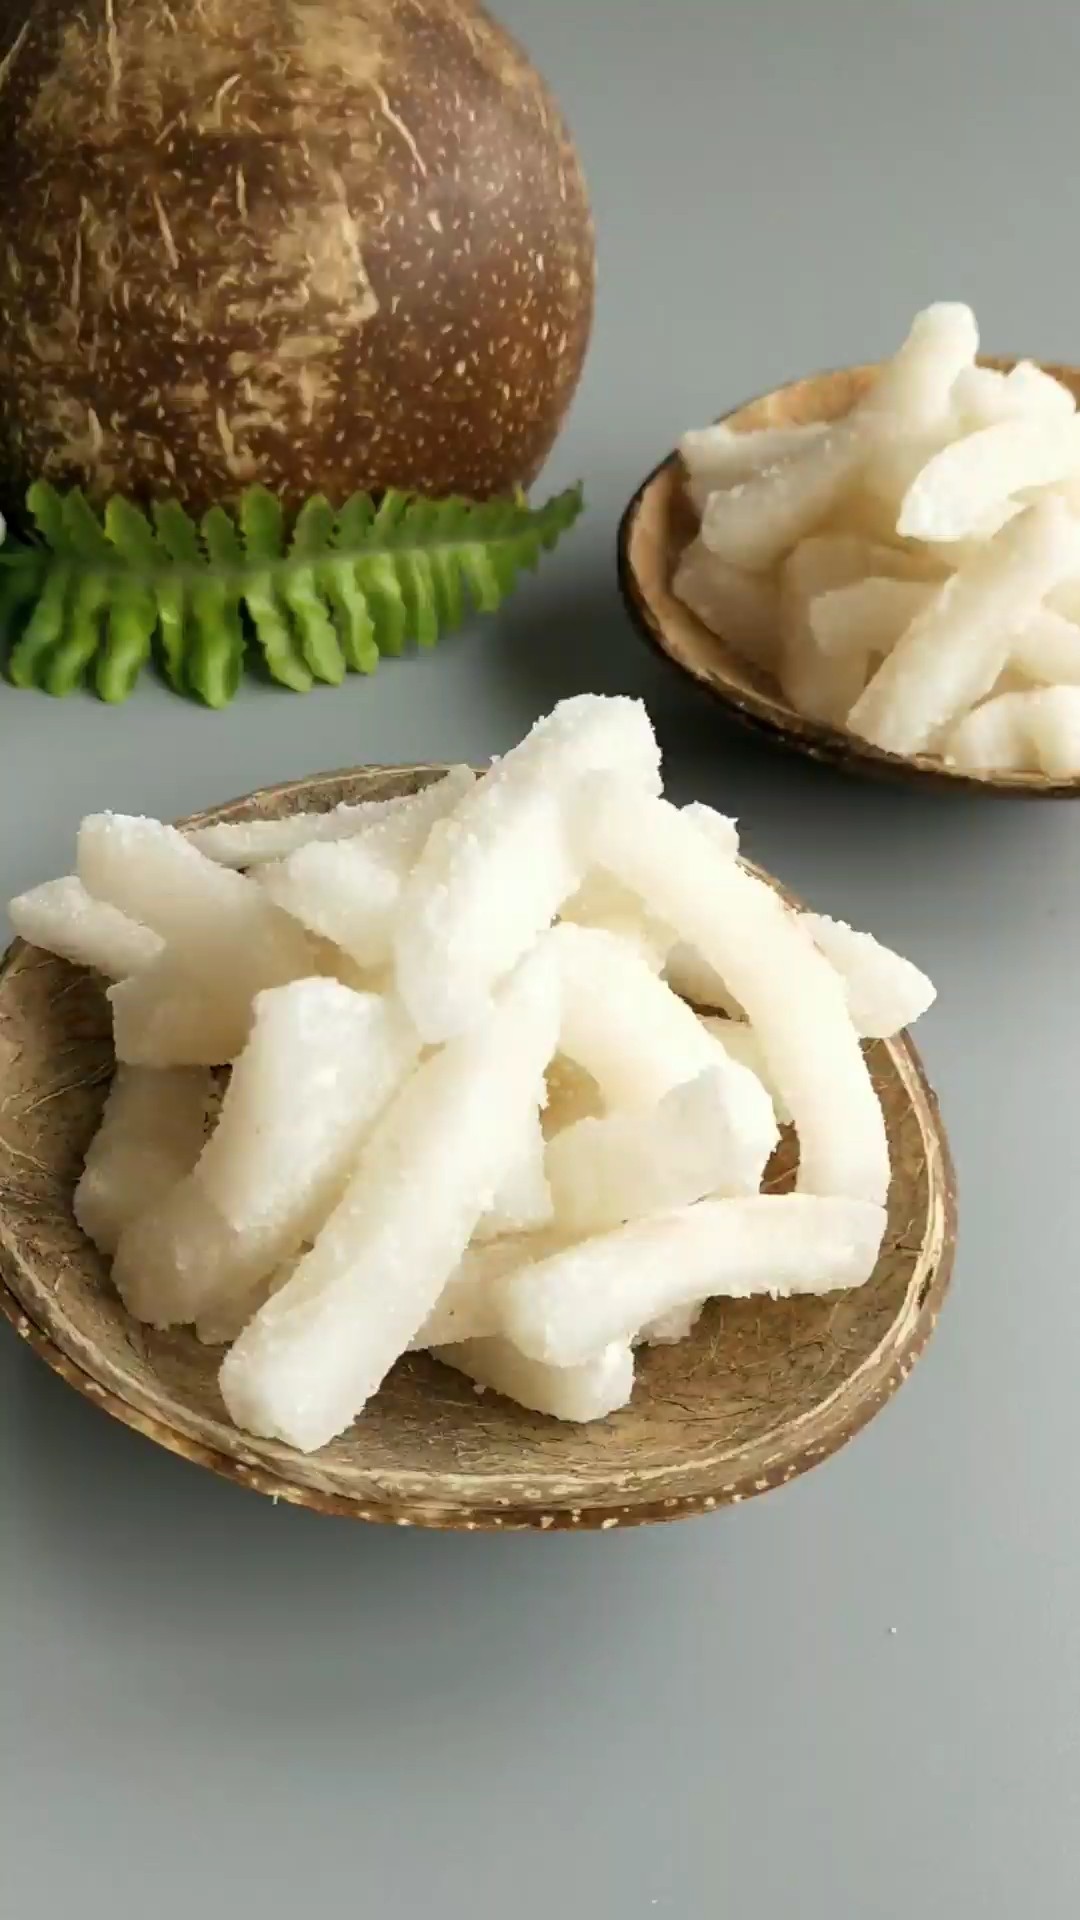 Candied Coconut Strips recipe